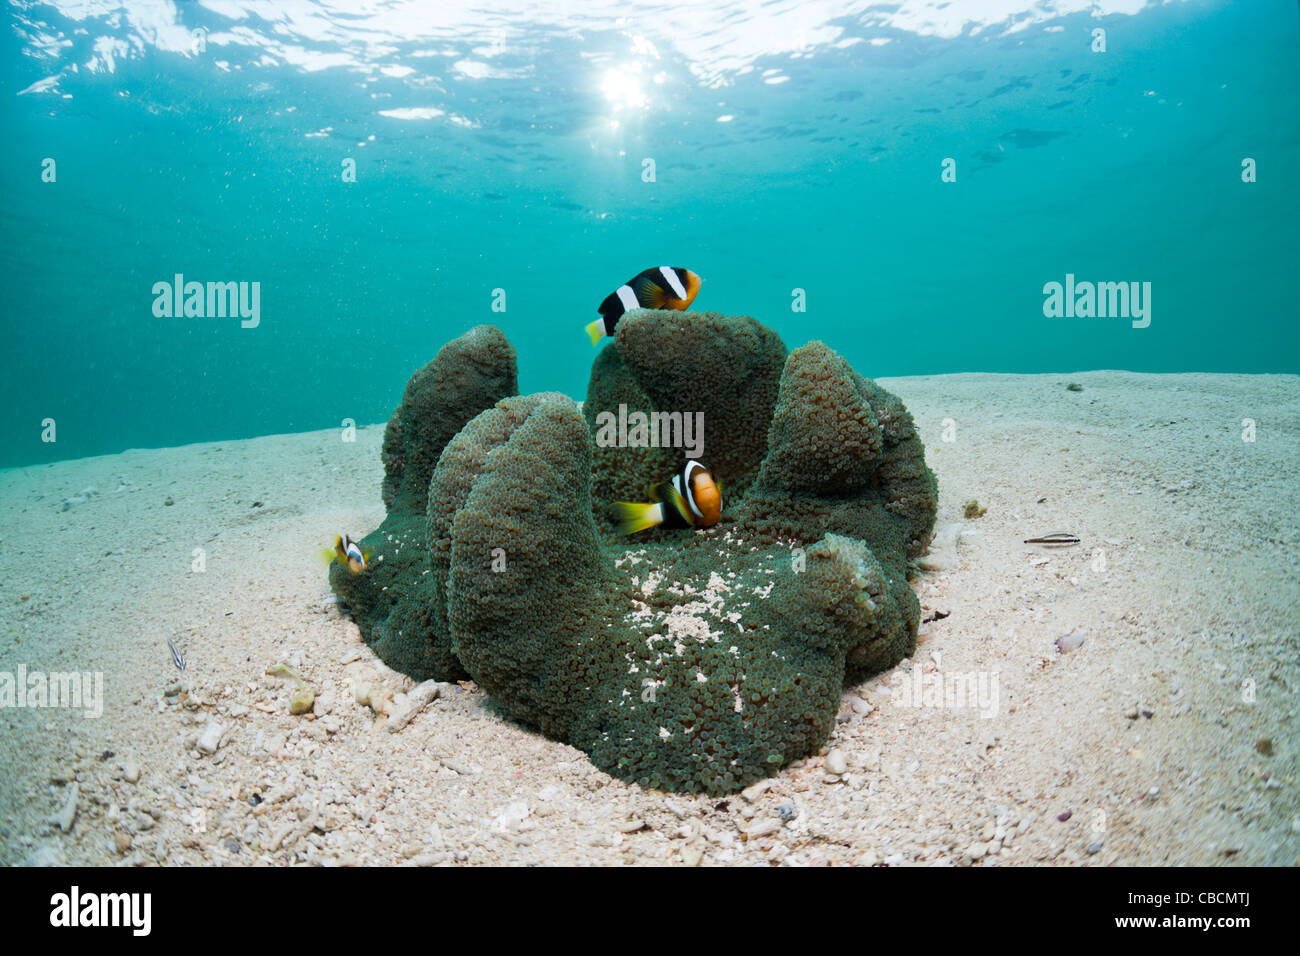 Clarks Anemonefish in Lagoon, Amphiprion clarkii, Cenderawasih Bay, West Papua, Indonesia Stock Photo